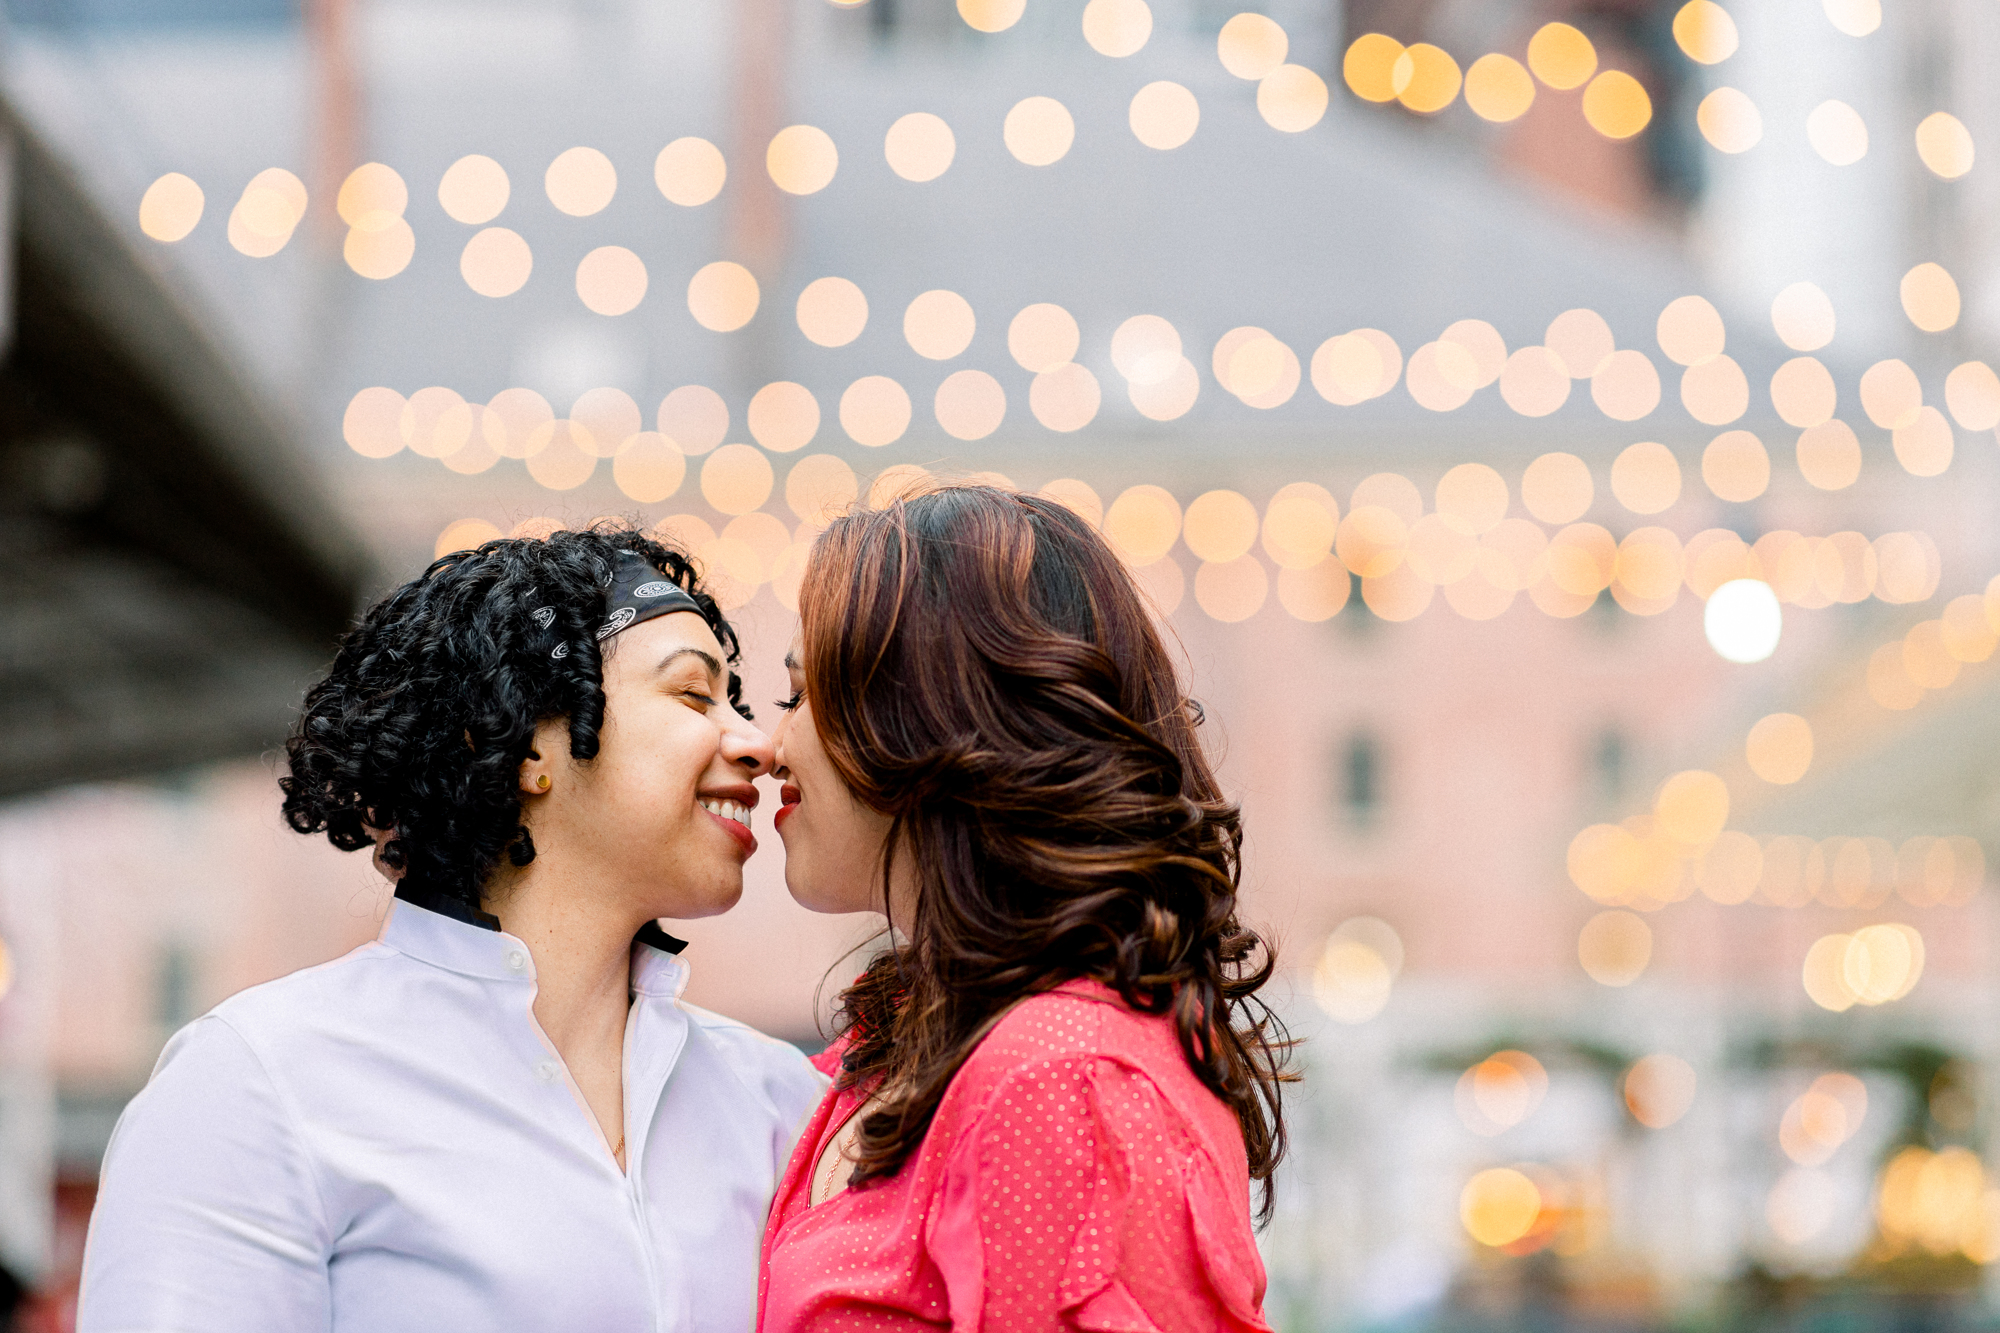 Timeless South Street Seaport Engagement Photography